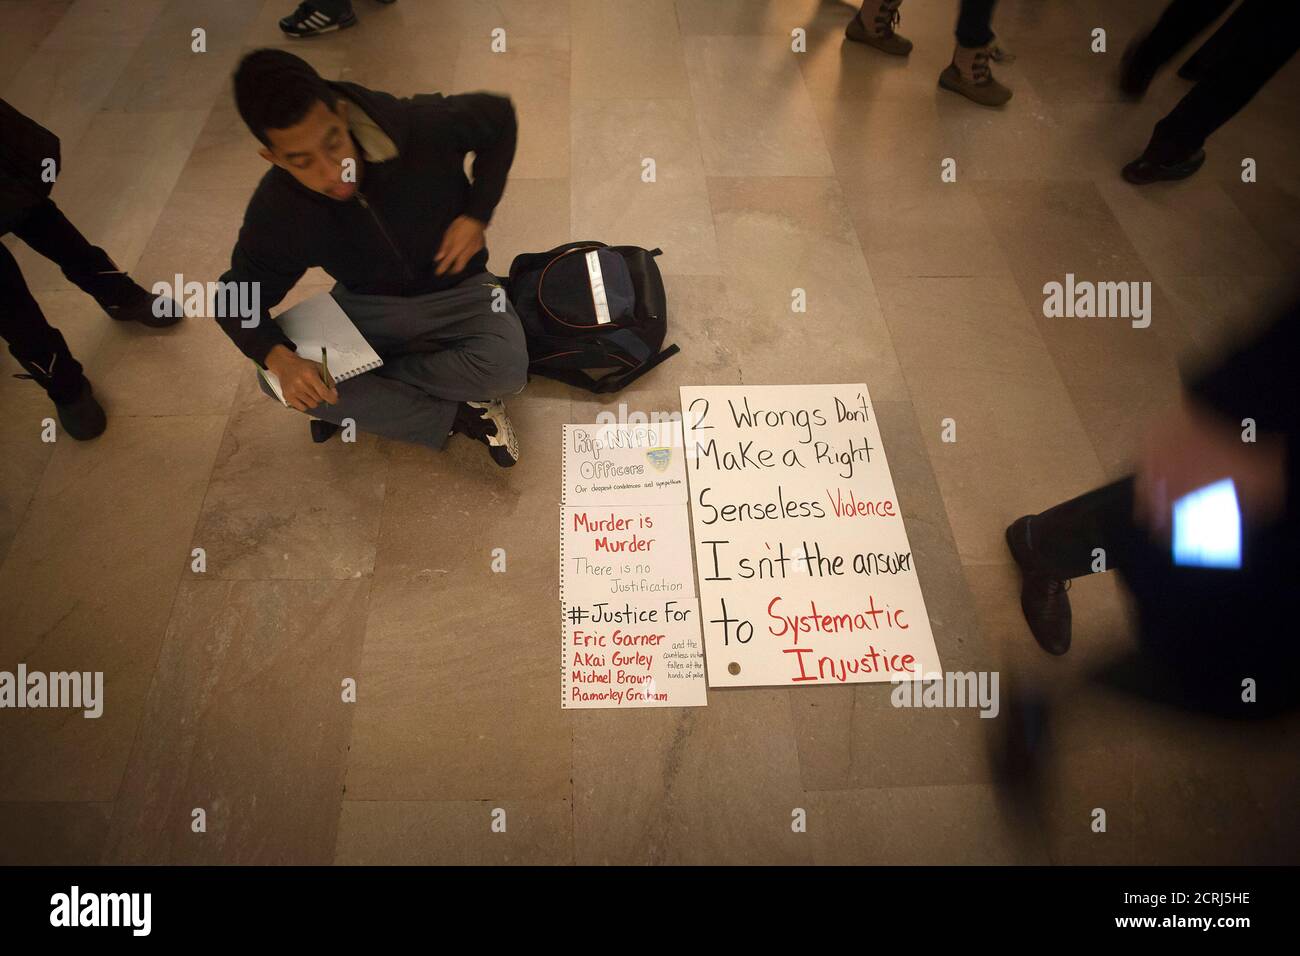 A lone protester sits on the floor of Grand Central Terminal to demonstrate against the police in the Manhattan borough of New York December 23, 2014. Mayor Bill de Blasio's attempts to soothe a city dismayed by the slaying of two officers were further rebuffed on Tuesday as protesters defied his call to suspend what have become regular demonstrations over excessive police force. REUTERS/Carlo Allegri (UNITED STATES - Tags: CIVIL UNREST CRIME LAW) Stock Photo